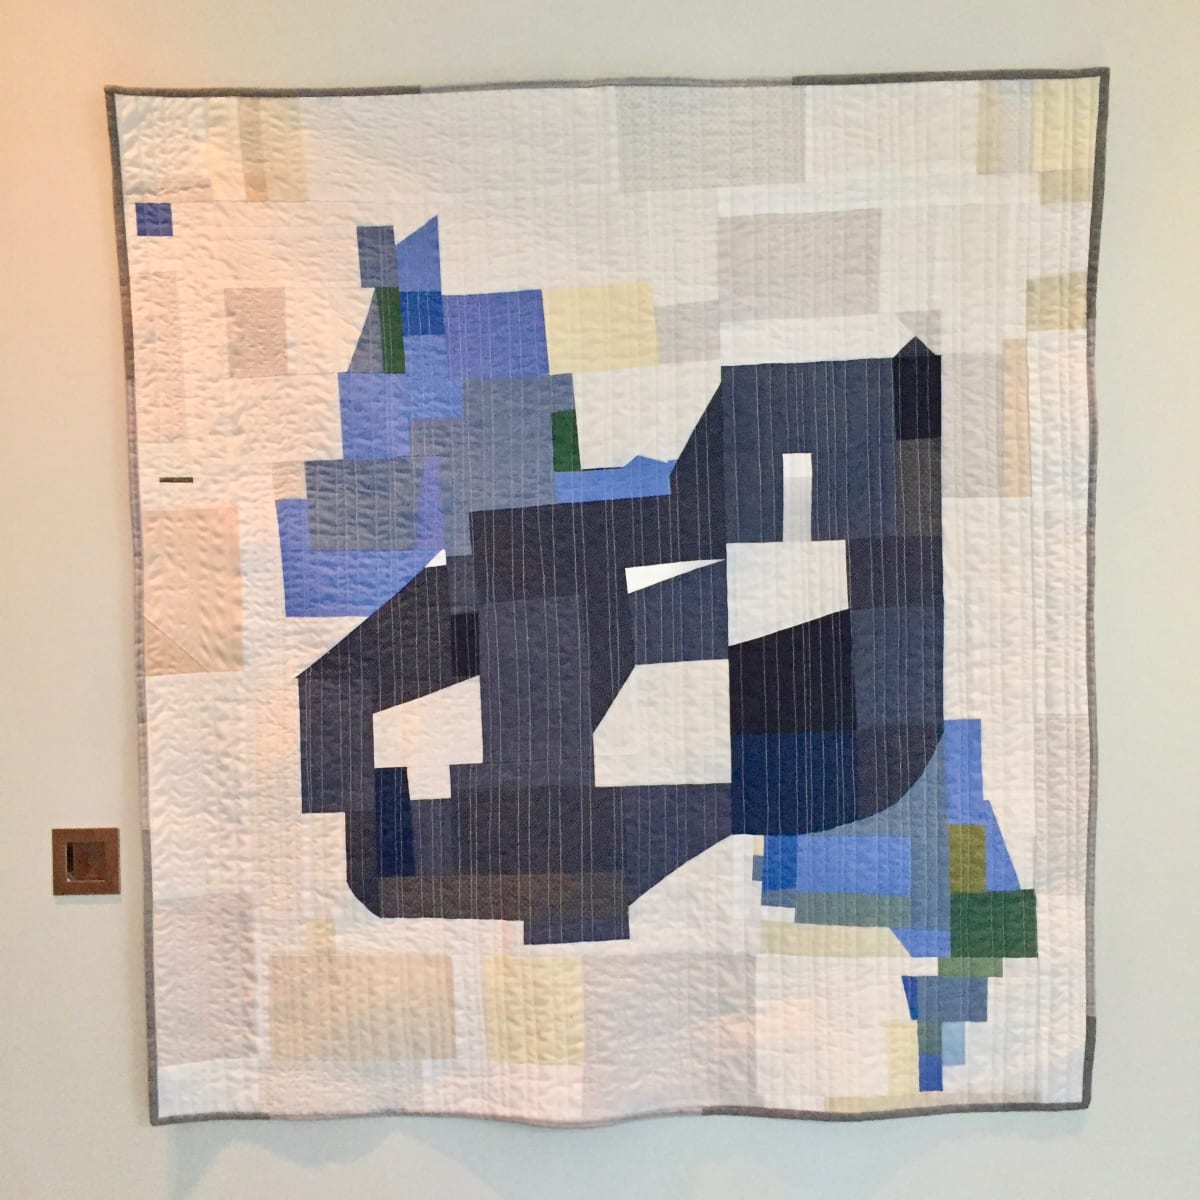 "Blue Island"  Image: "Blue Island " quilt was chosen to be in the exhibit of quilts at the 2020 Quiltcon show in Austin Texas.